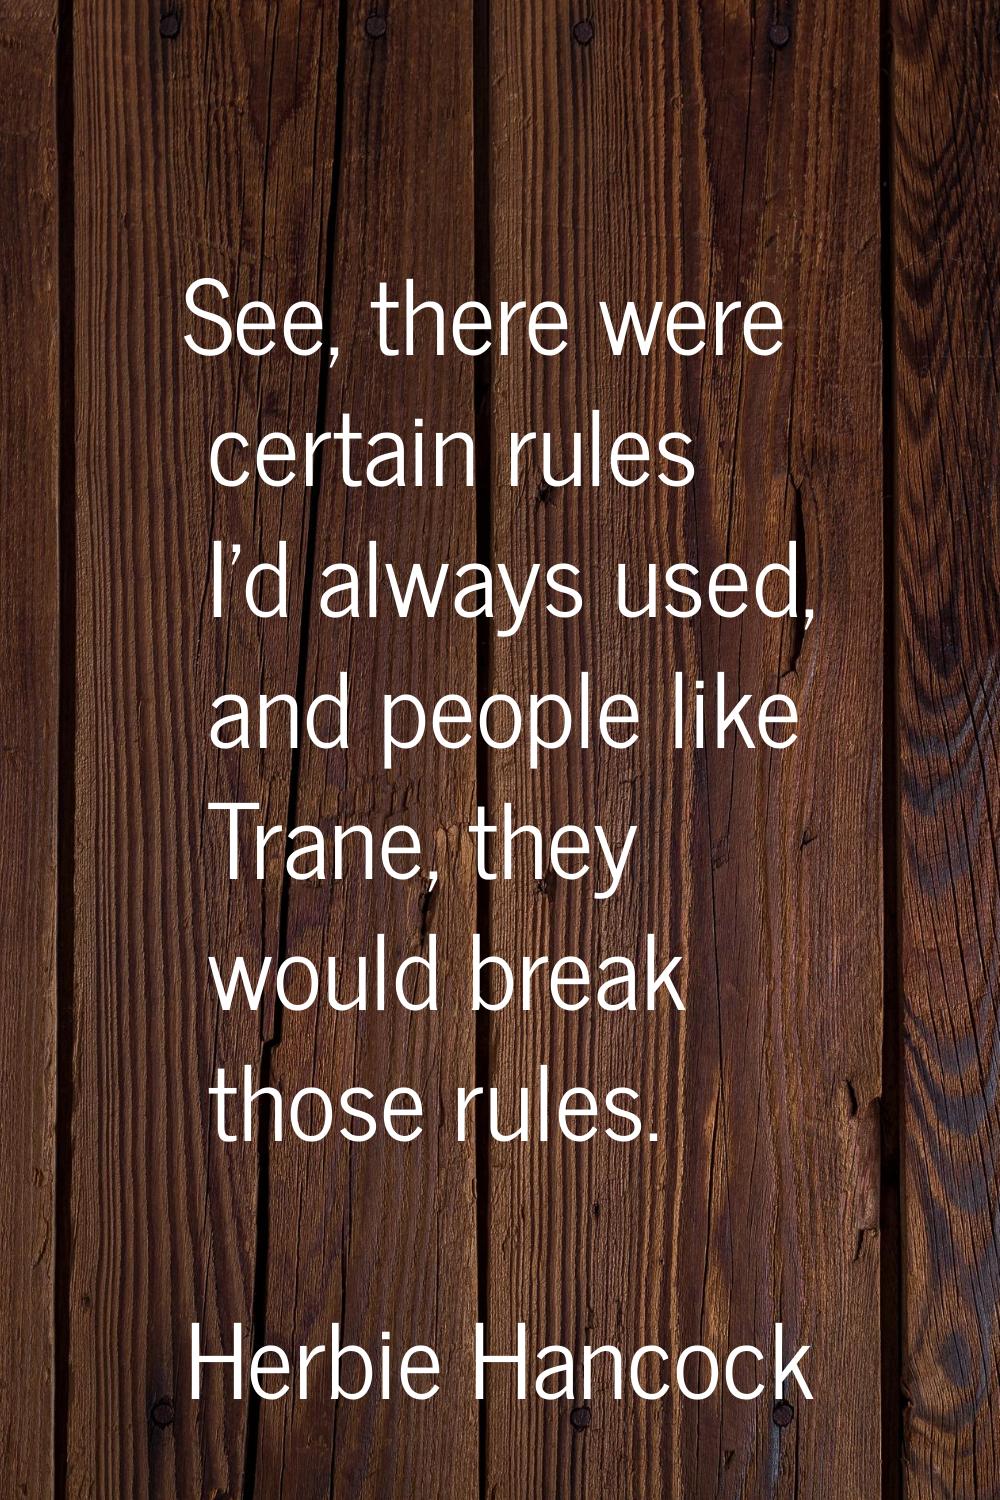 See, there were certain rules I'd always used, and people like Trane, they would break those rules.